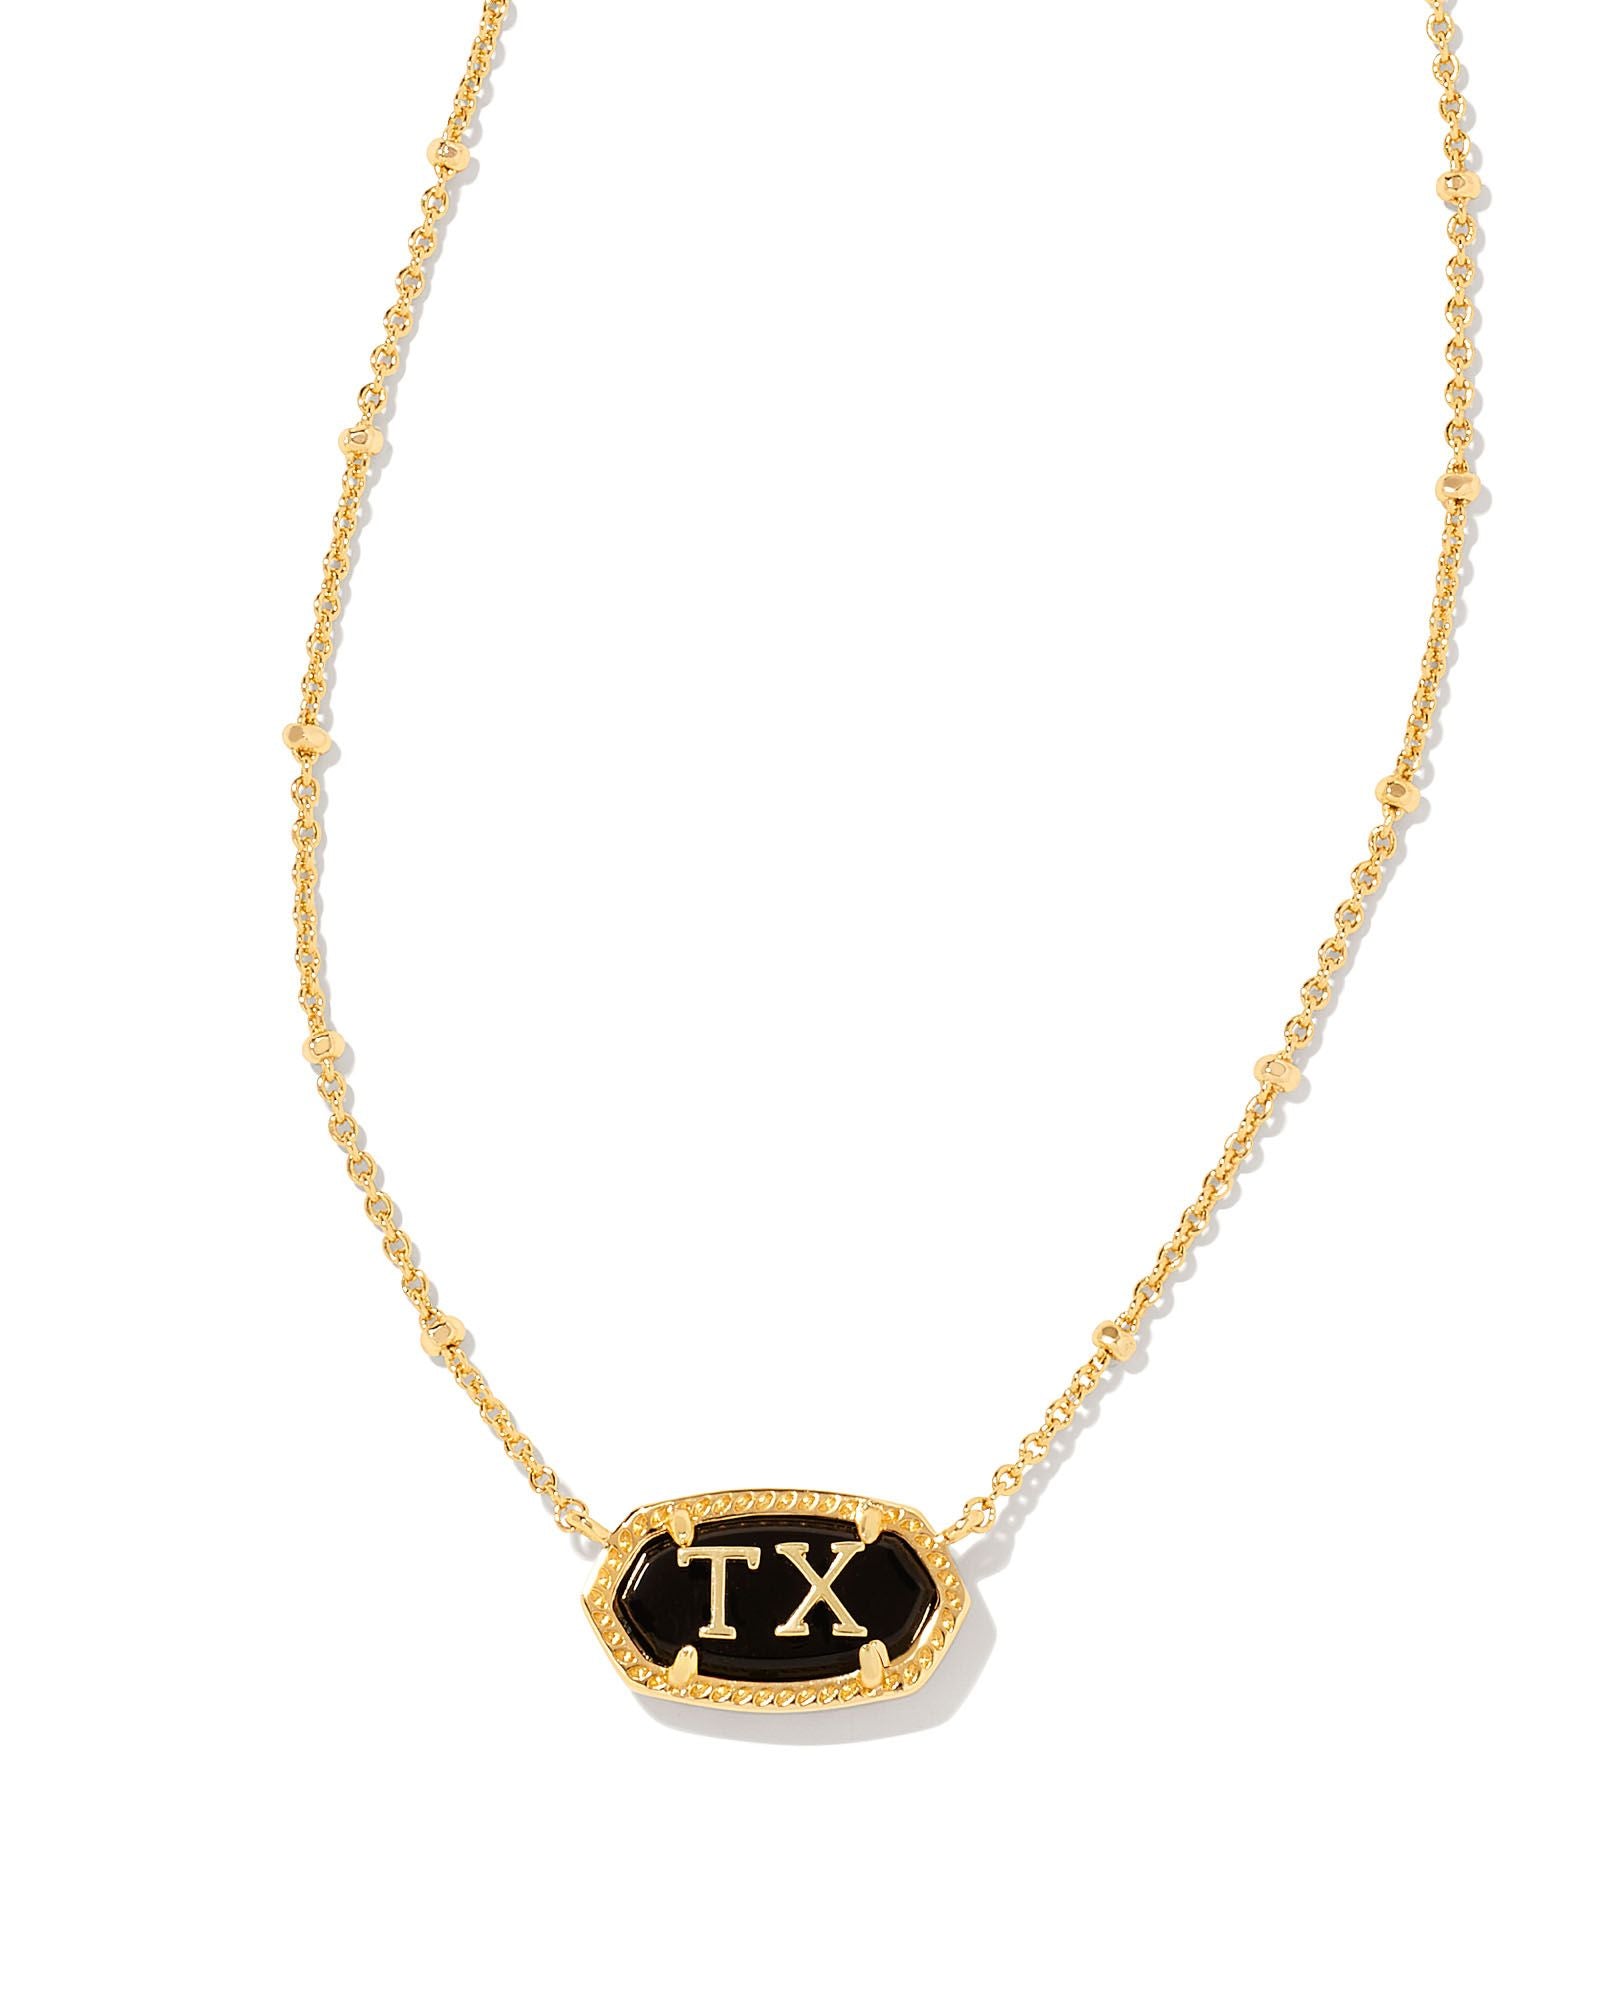 Elisa Texas Necklace in Gold Black Agate